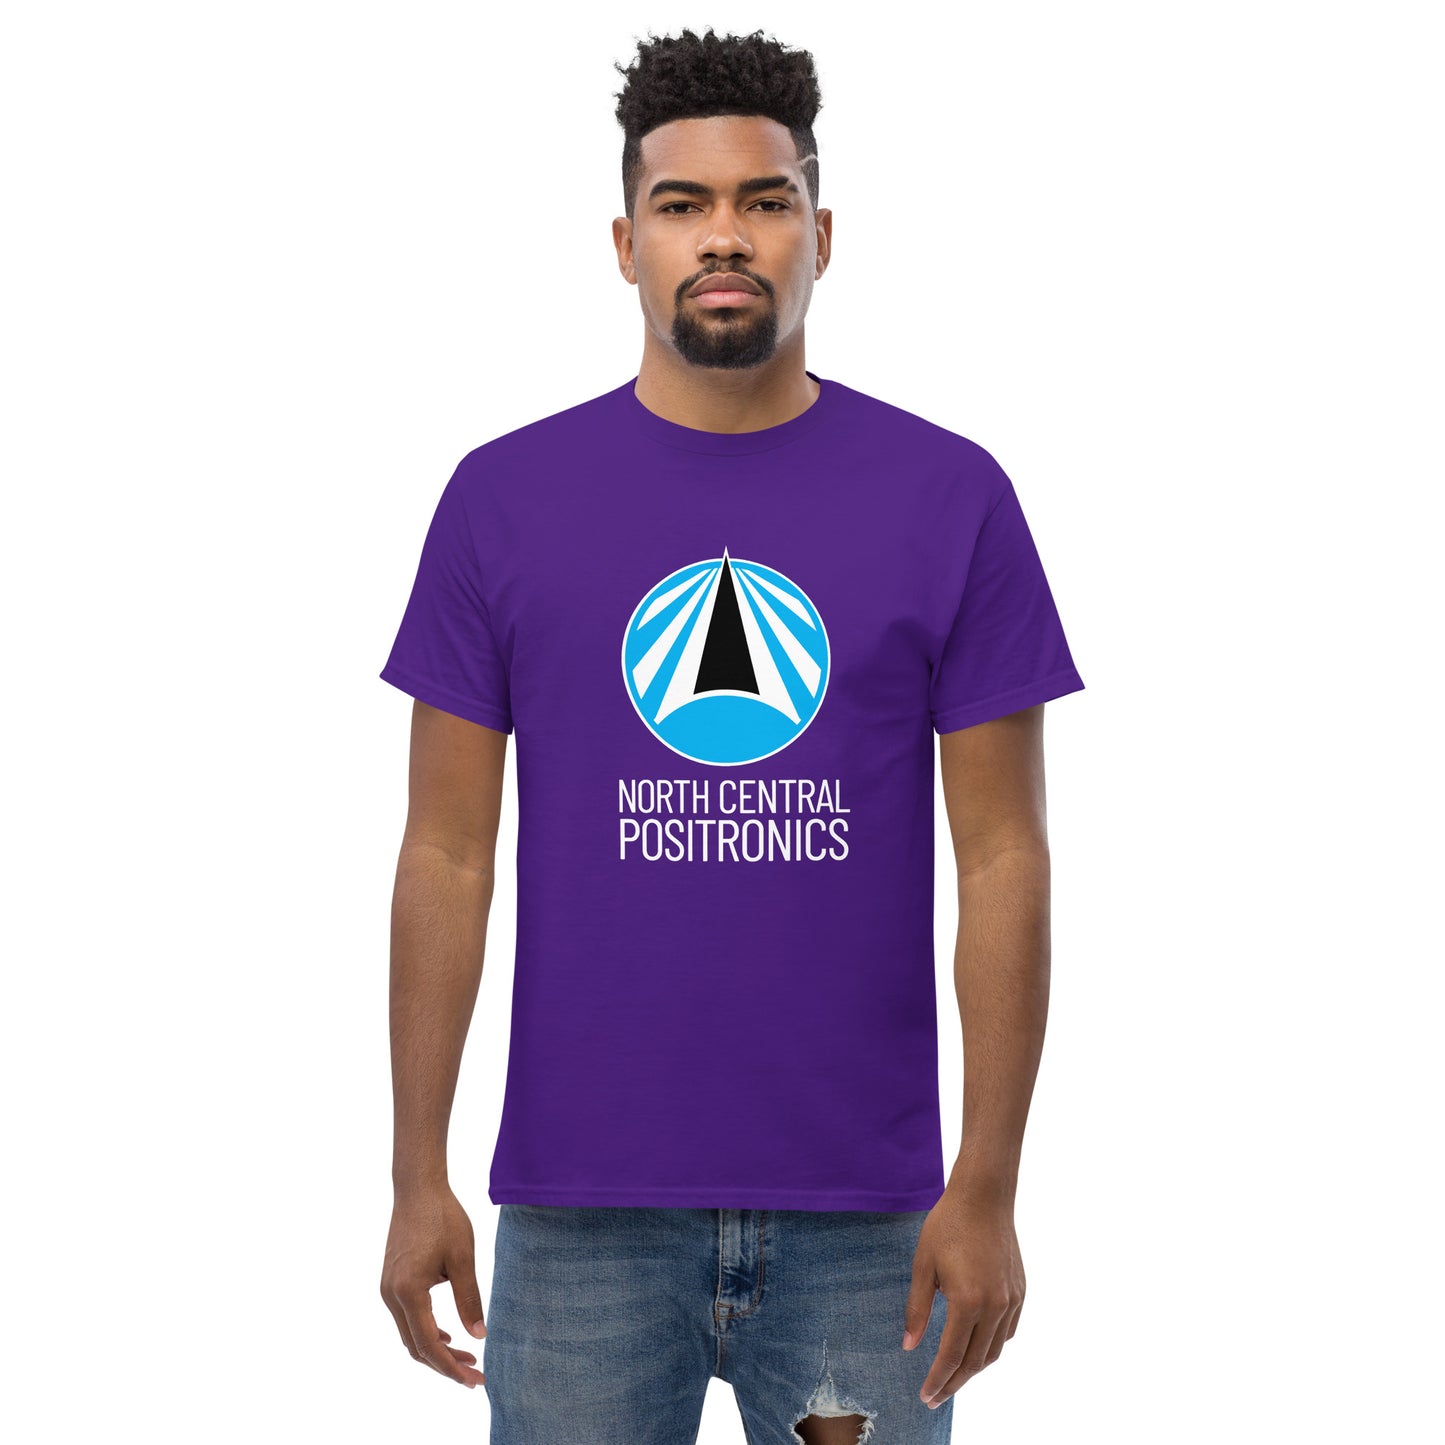 North Central Positronics T-Shirt, White Logo, Classic Fit